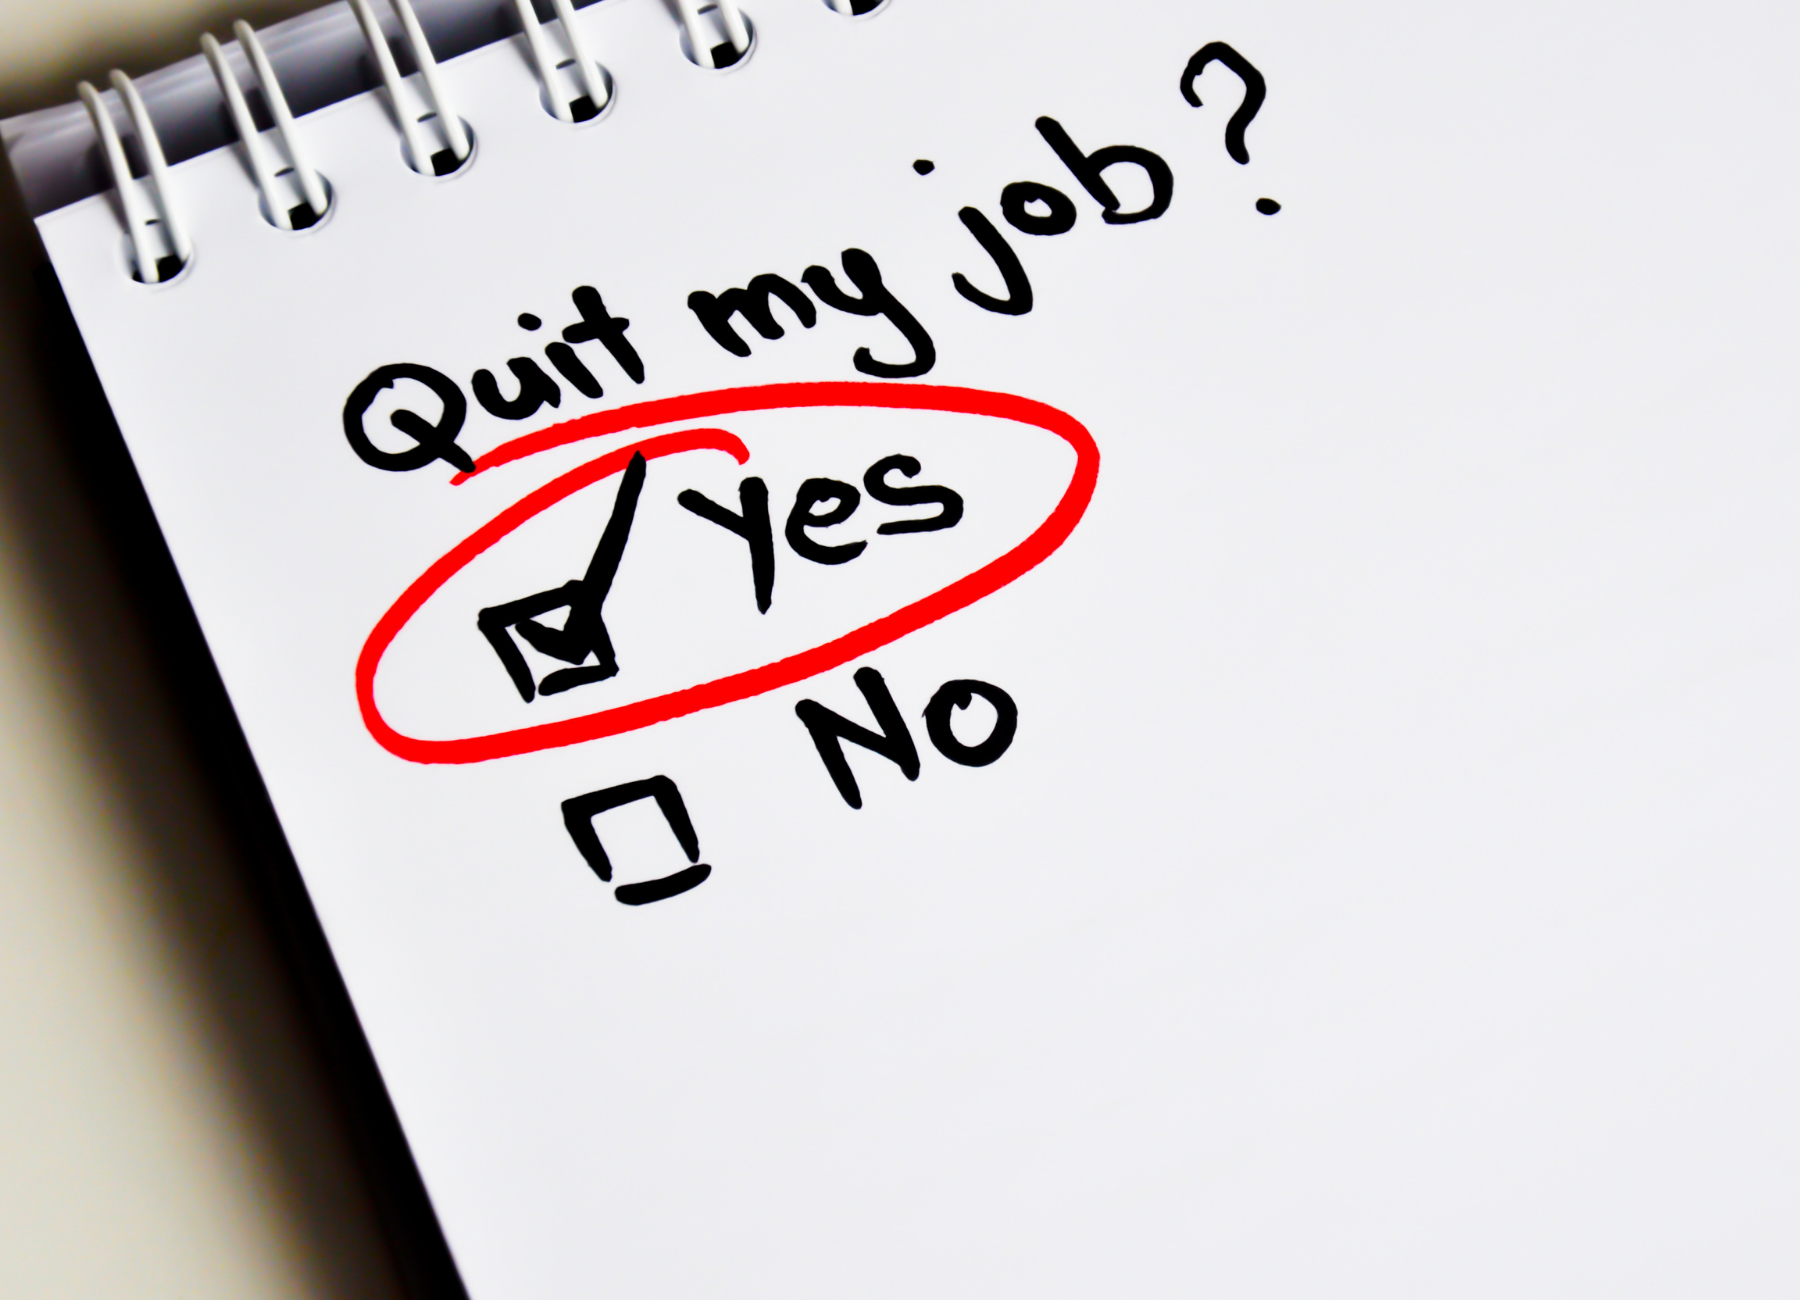 notepad with "quit my job?" and the "yes" box checked written in black Sharpie.